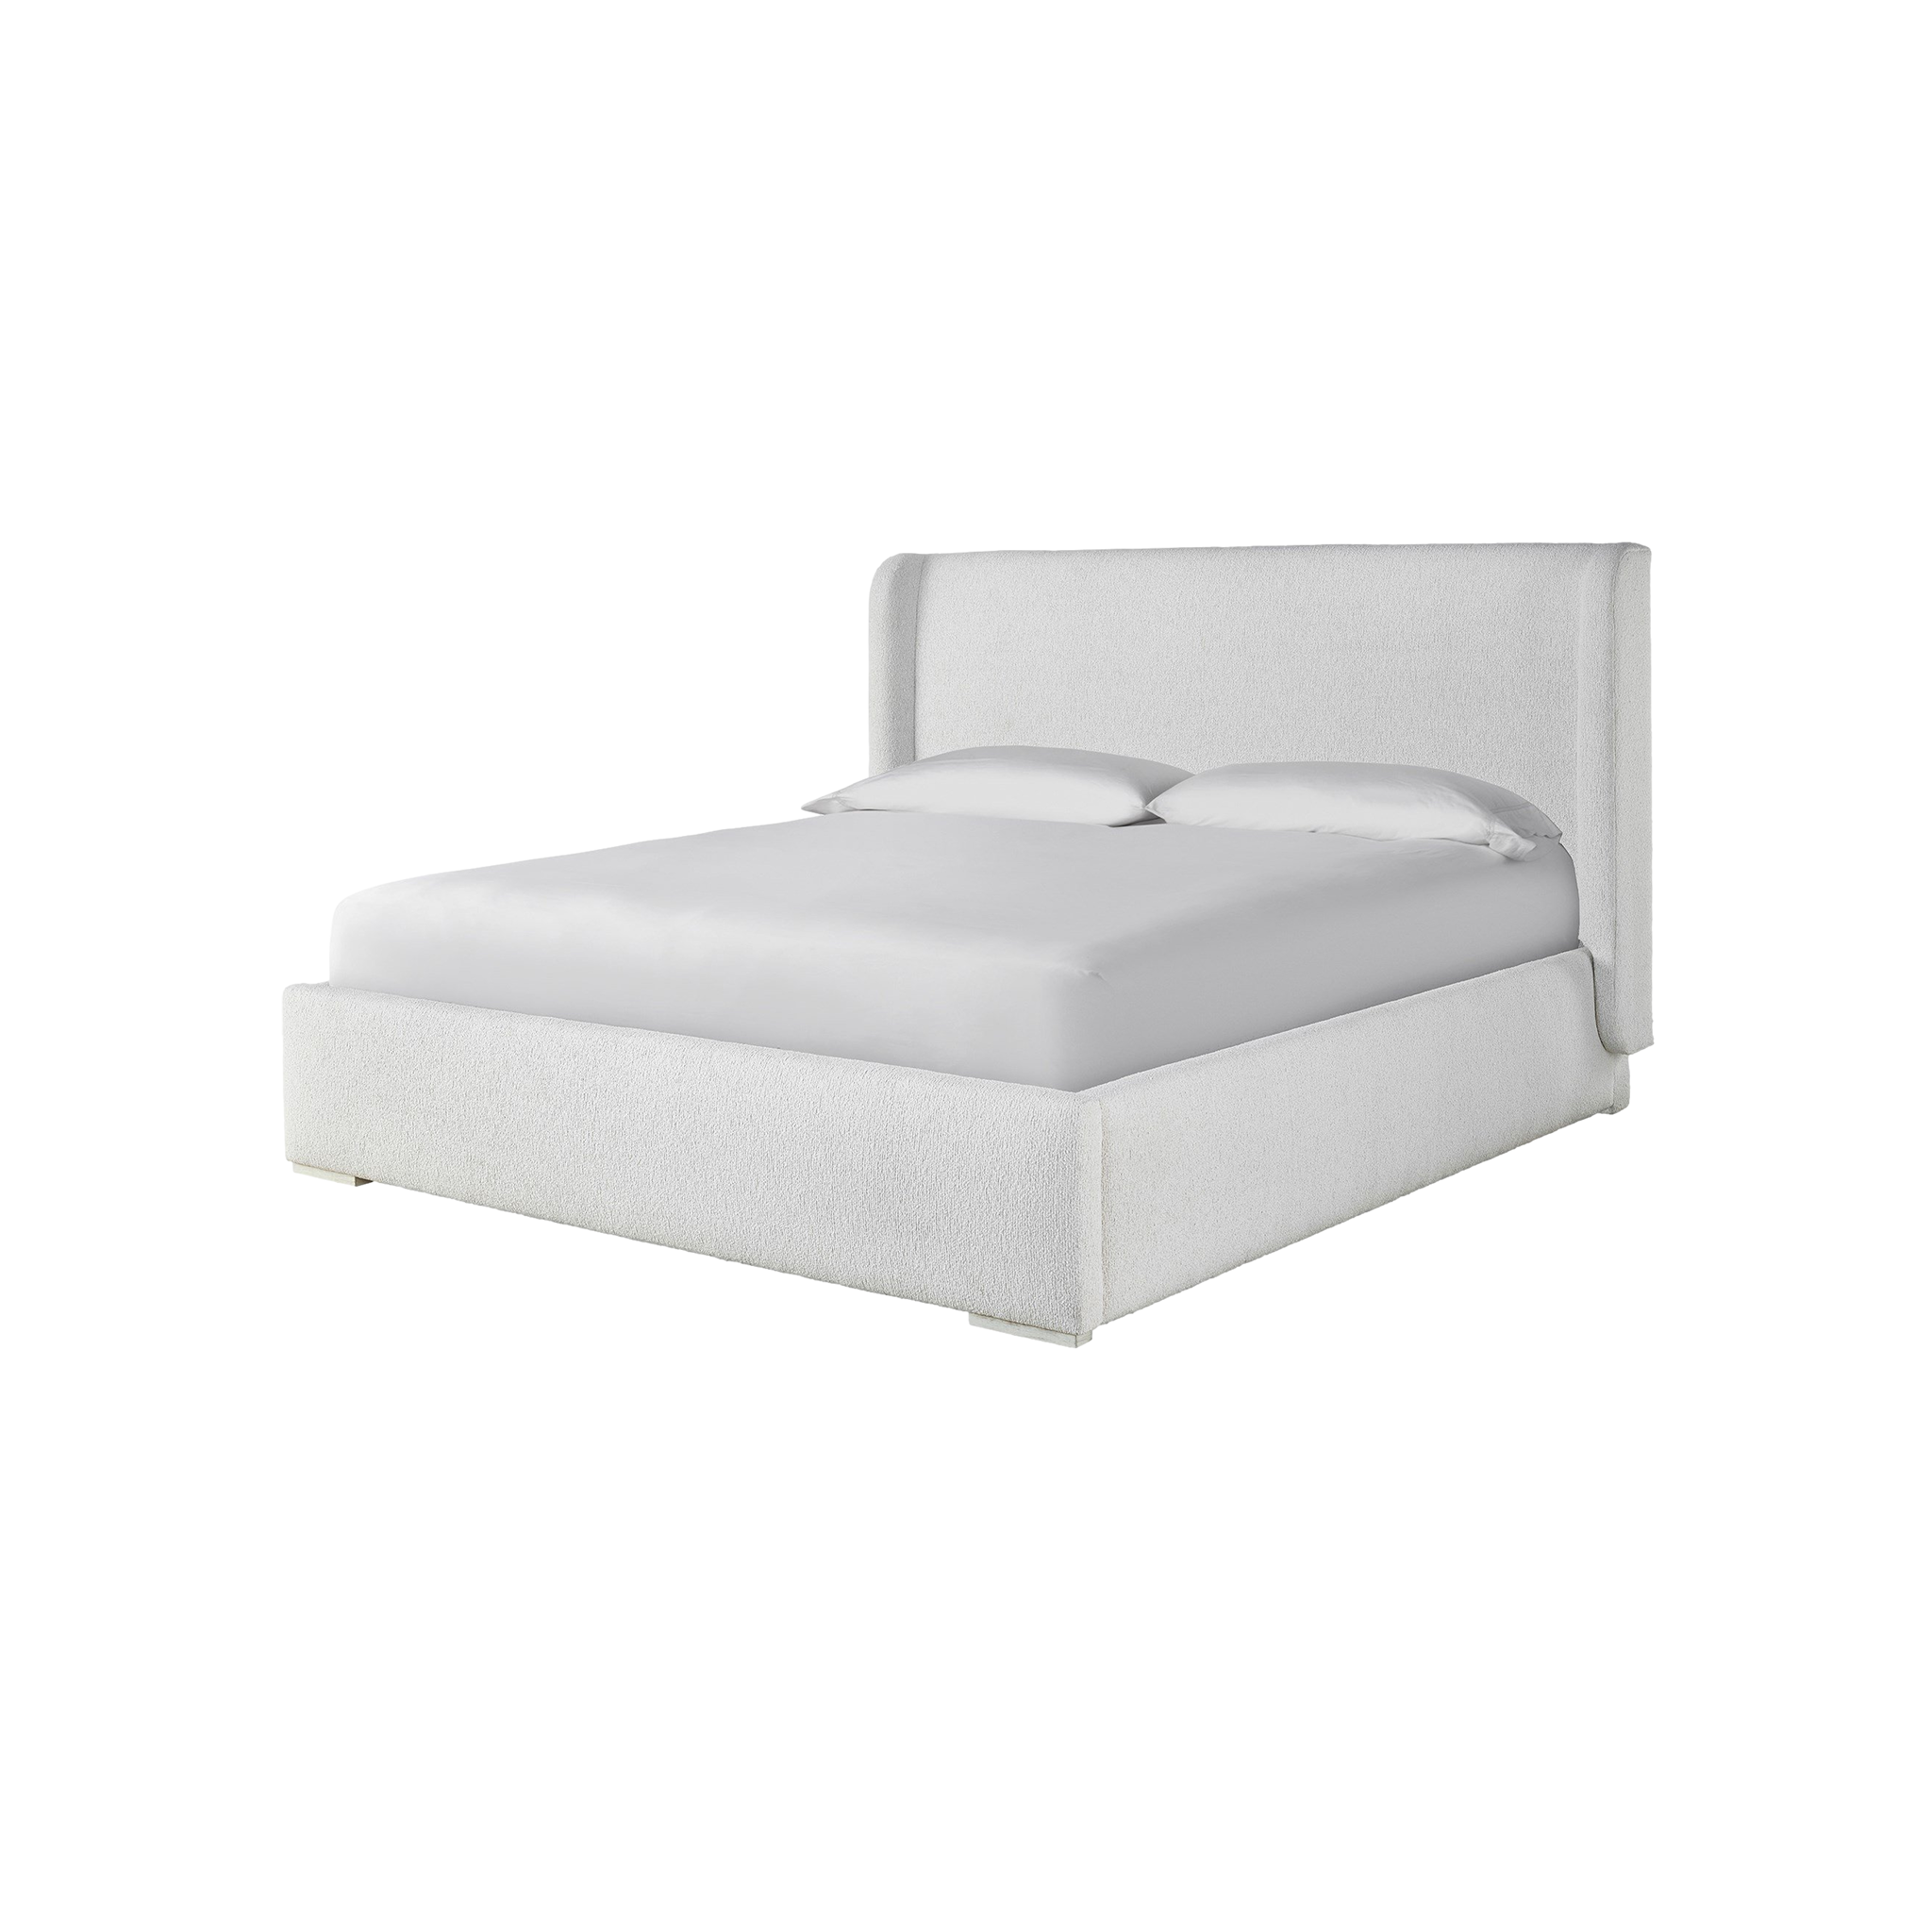 Tranquility Upholstered King Bed